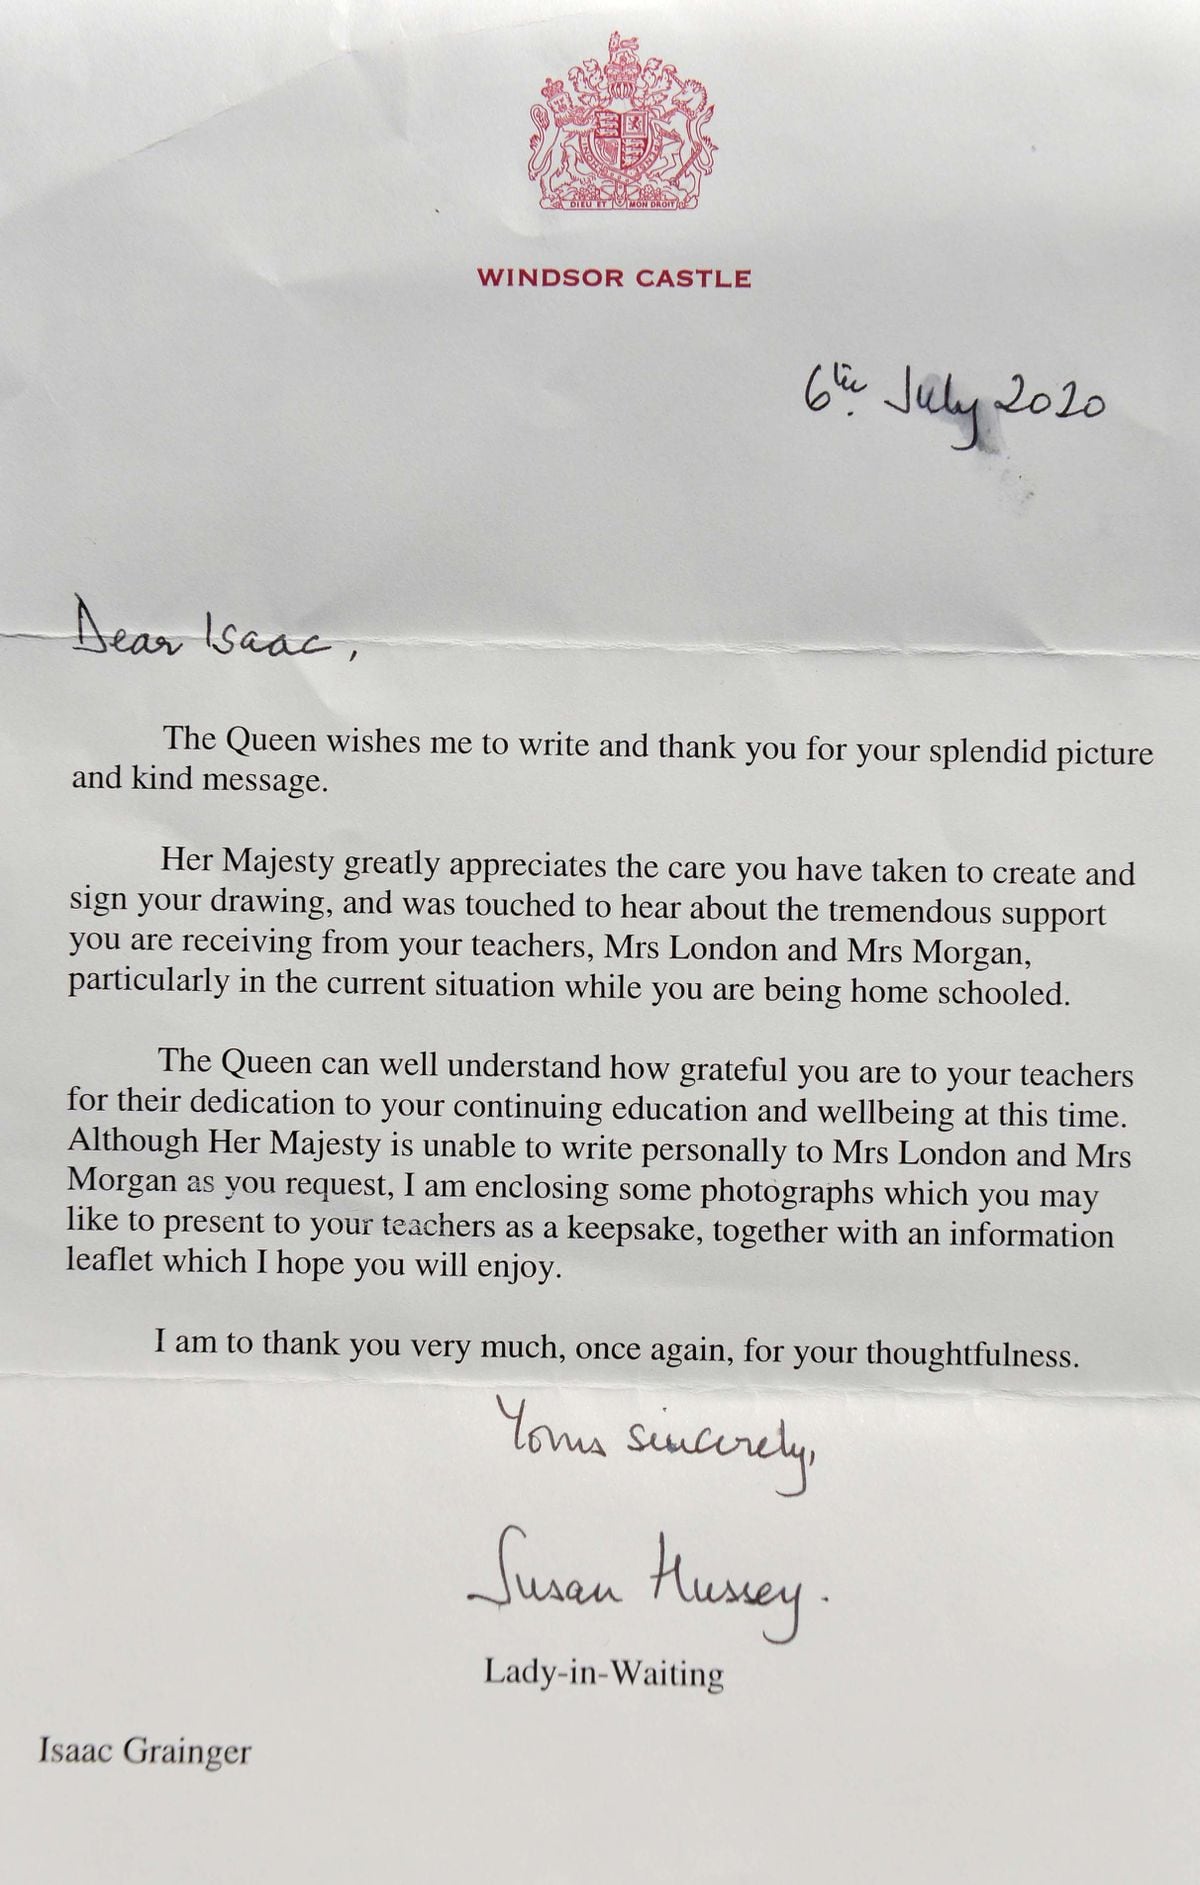 Isaac wrote to the queen about his teachers and the Lady in Waiting replied